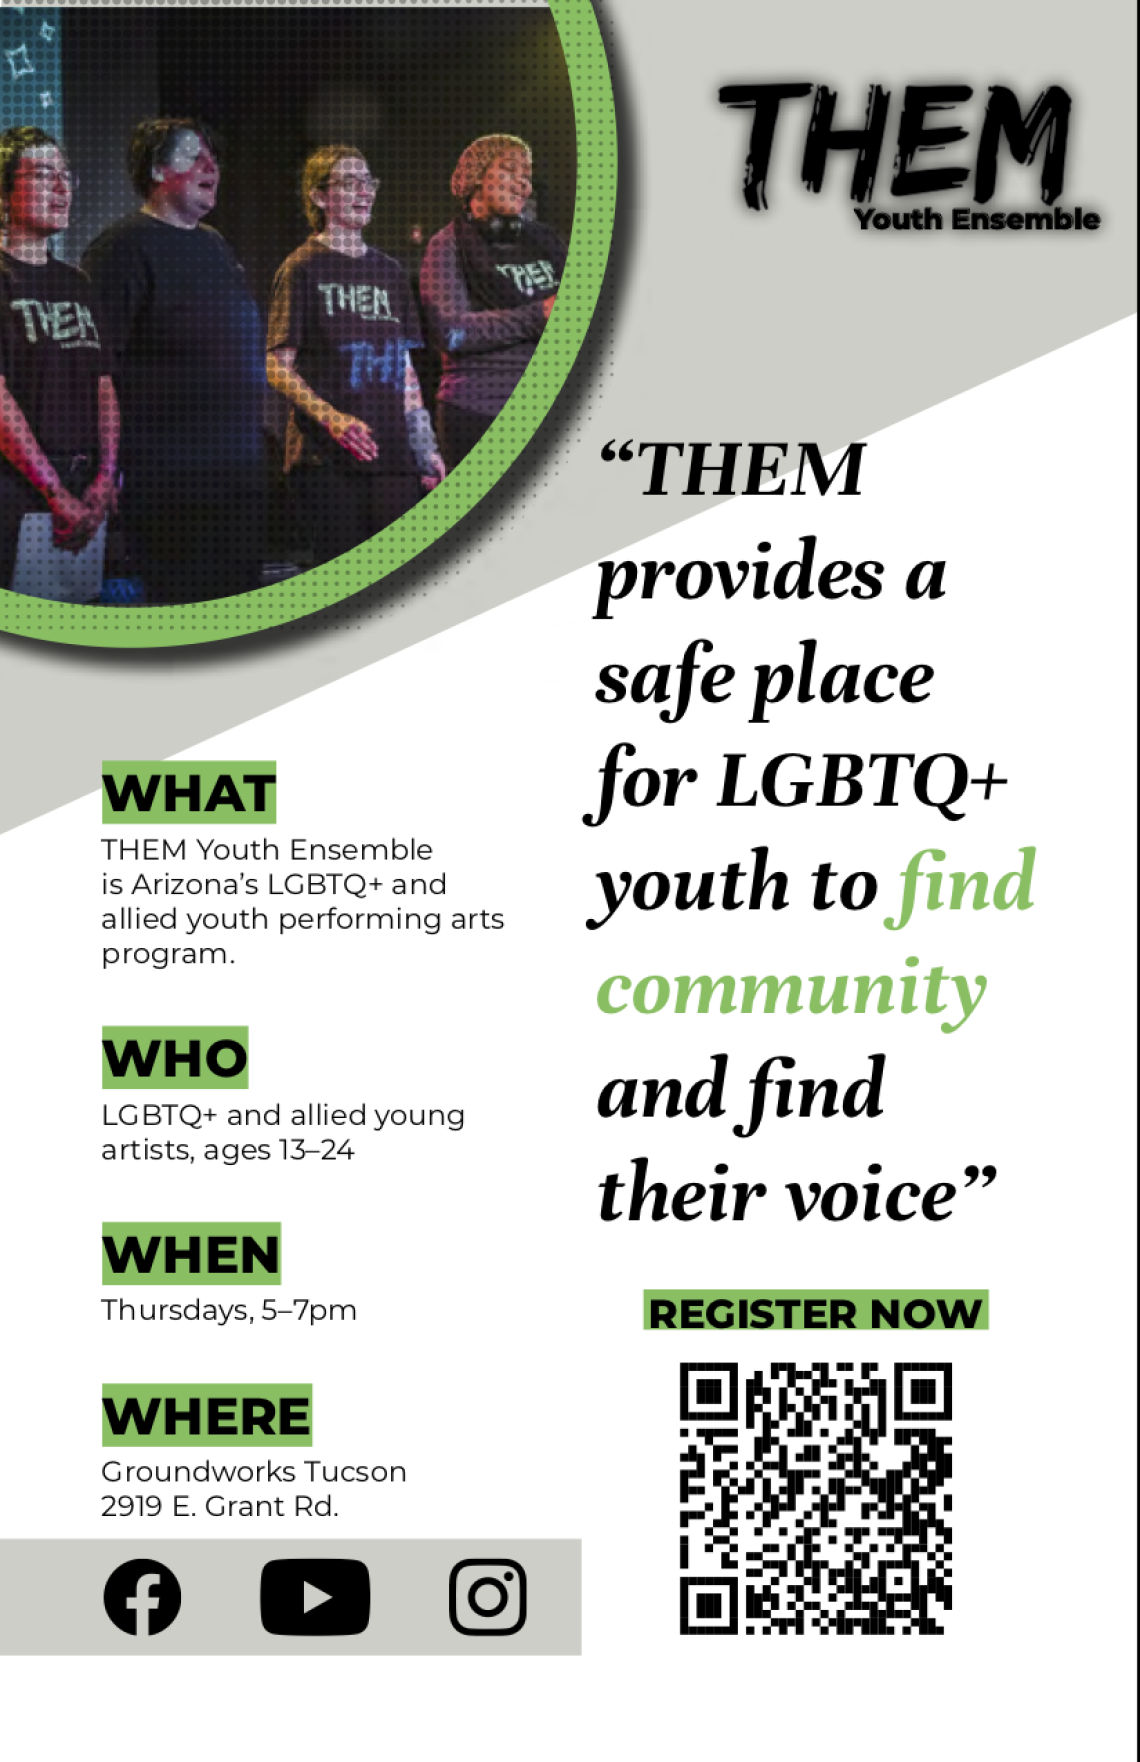 THEM Youth Ensemble “THEM provides a safe place for LGBTQ+ youth to find community and find their voice”